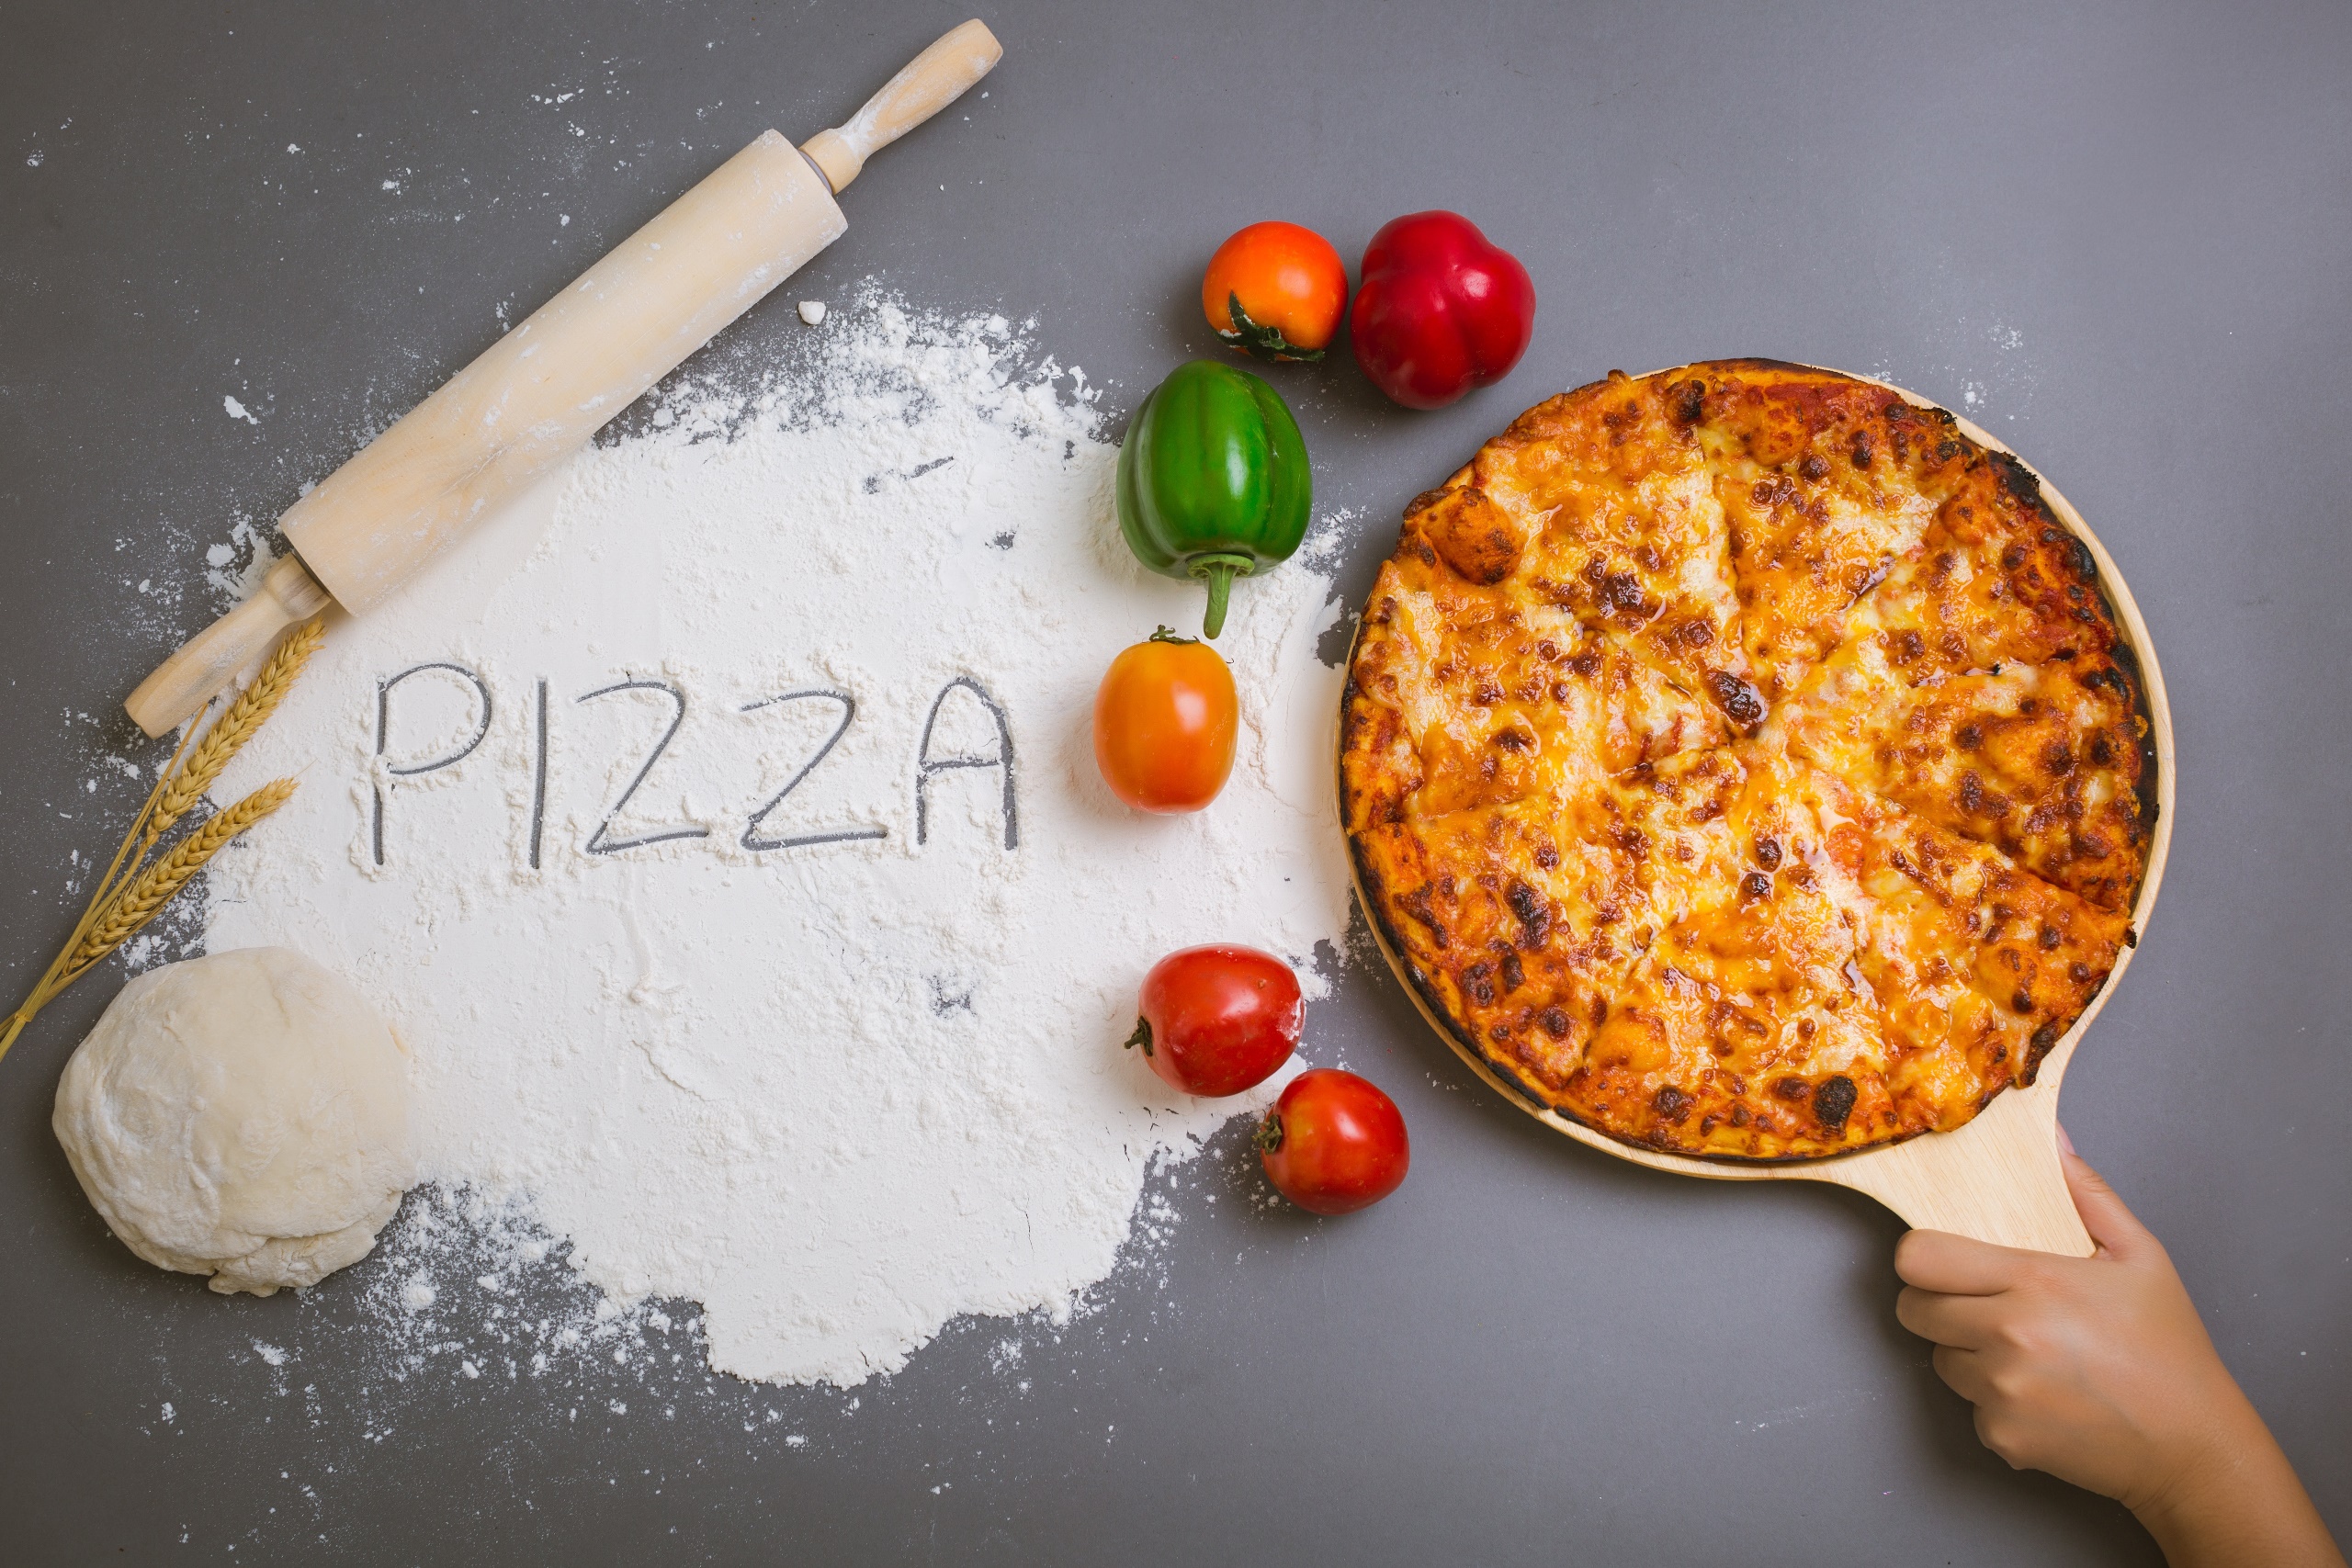 General 2560x1707 pizza food vegetables tomatoes pepper flour wheat rolling pin closeup simple background